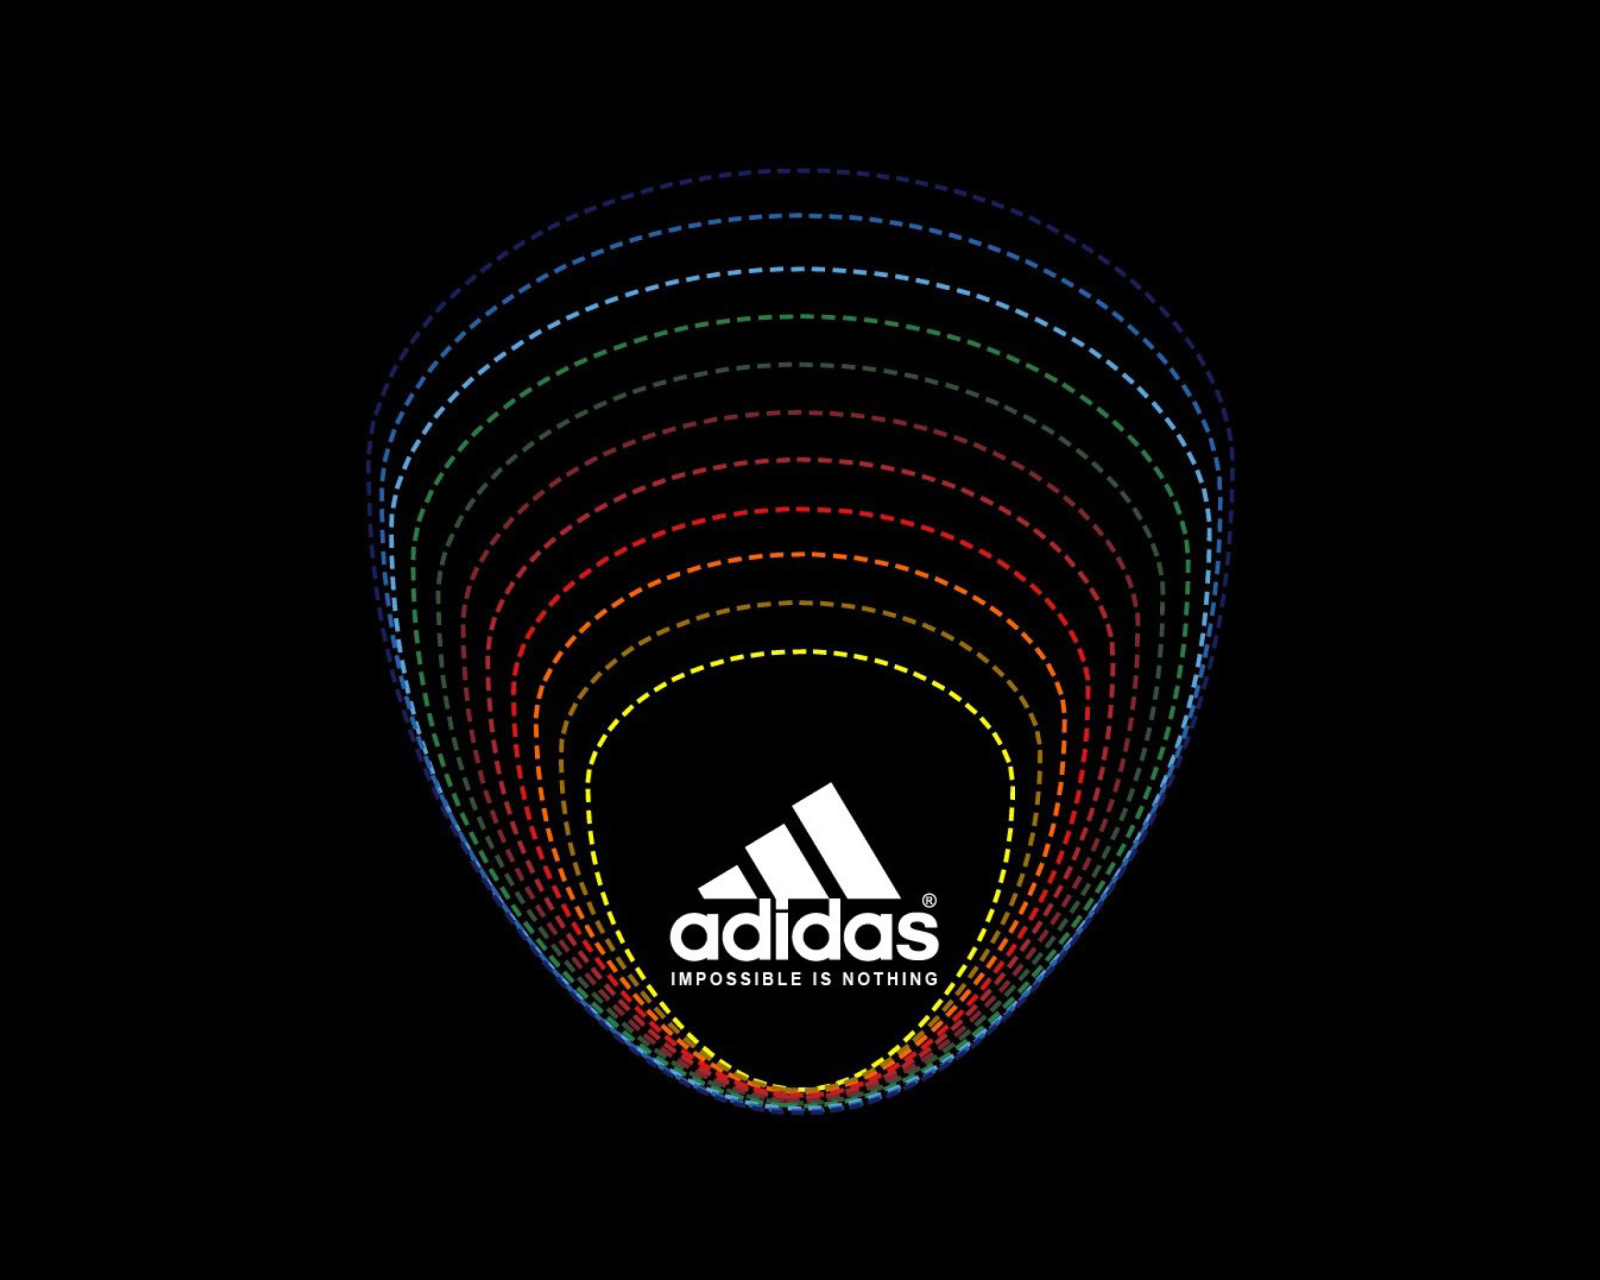 Обои Adidas Tagline, Impossible is Nothing 1600x1280